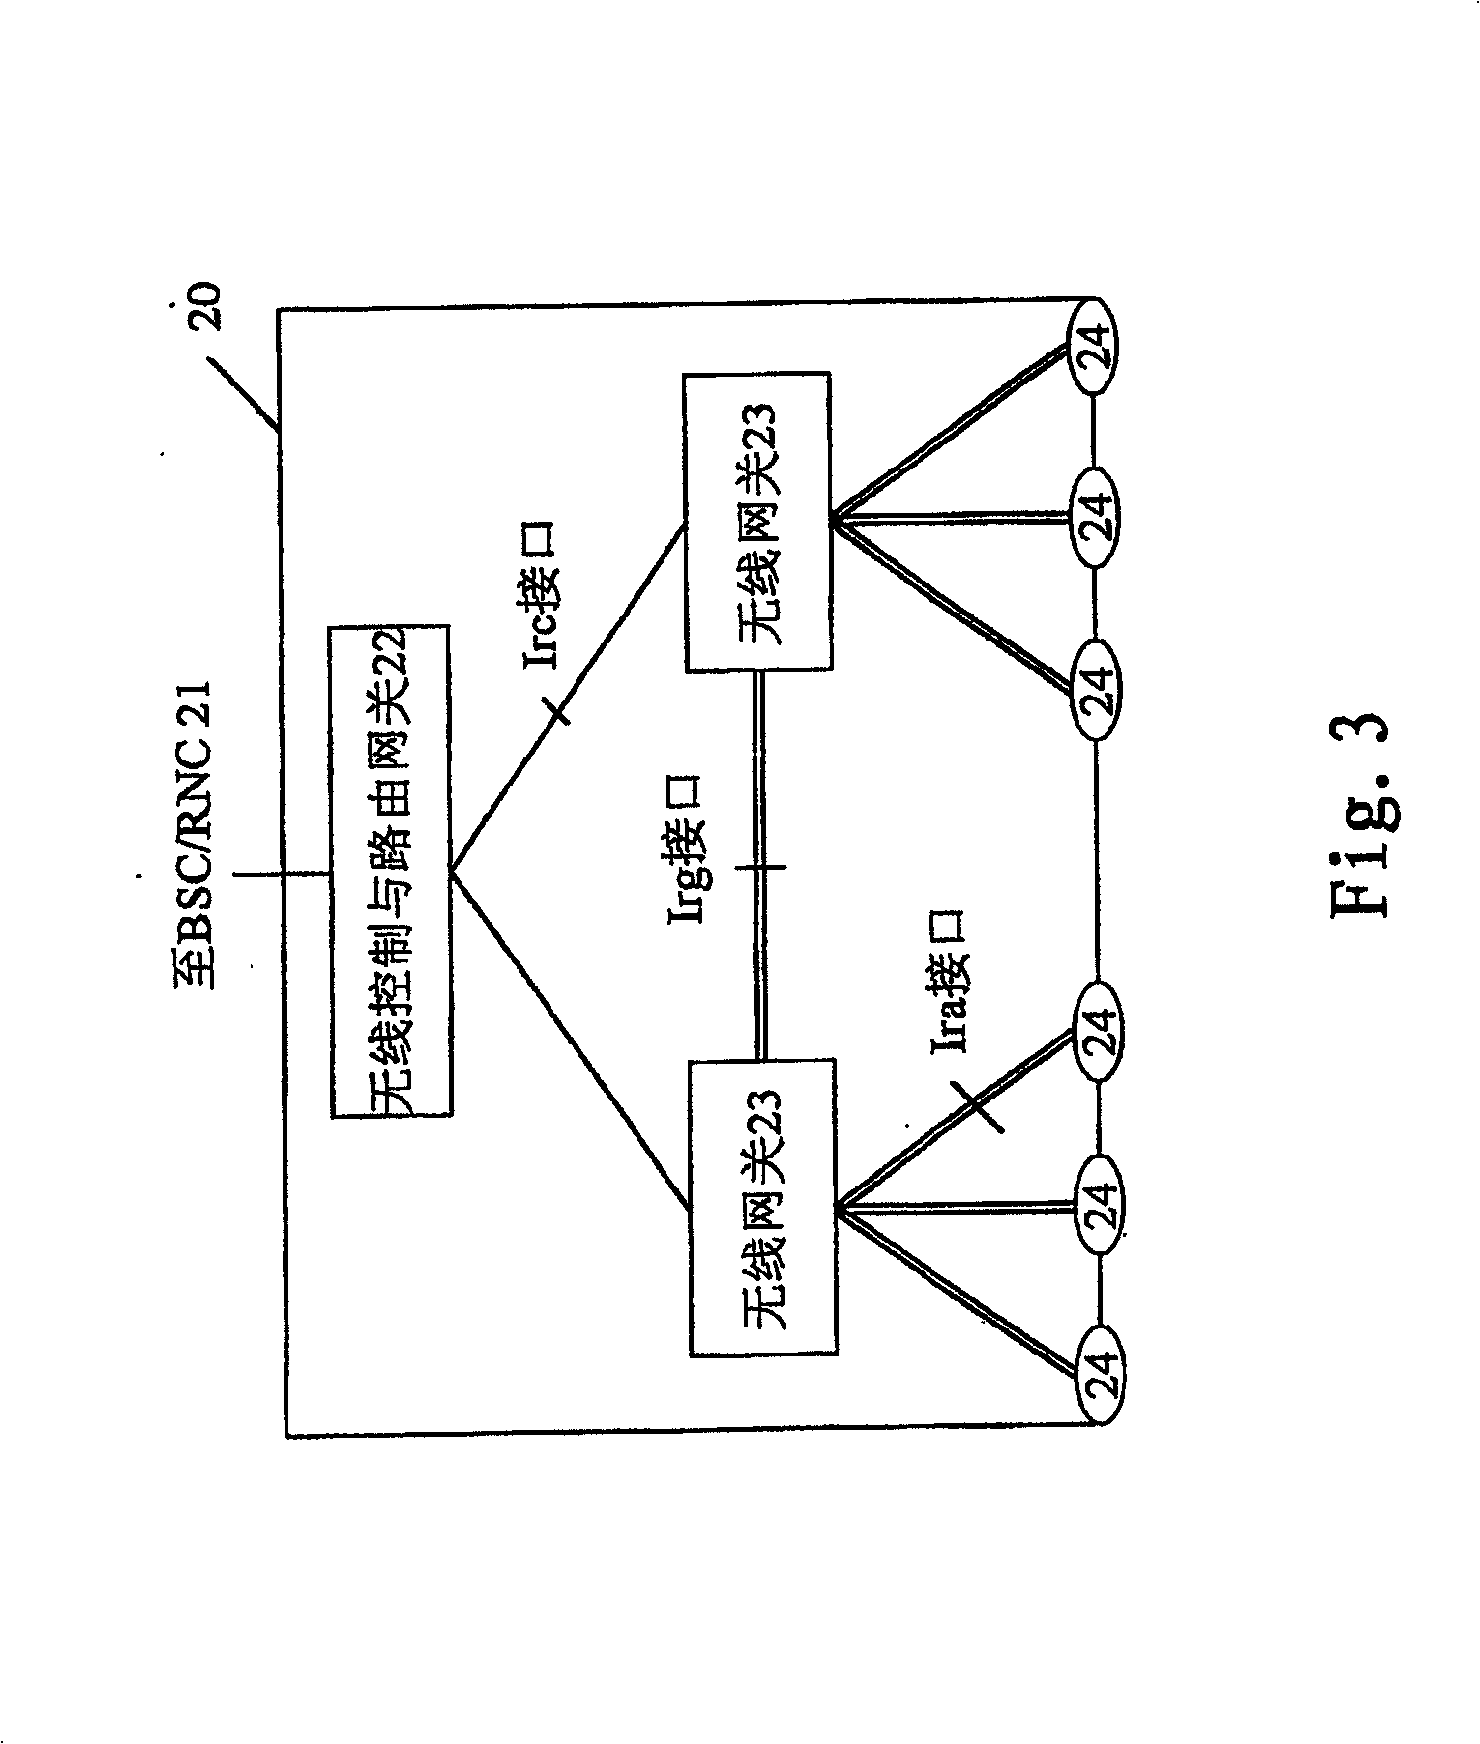 Distributed wireless system for controlling the resource centrally